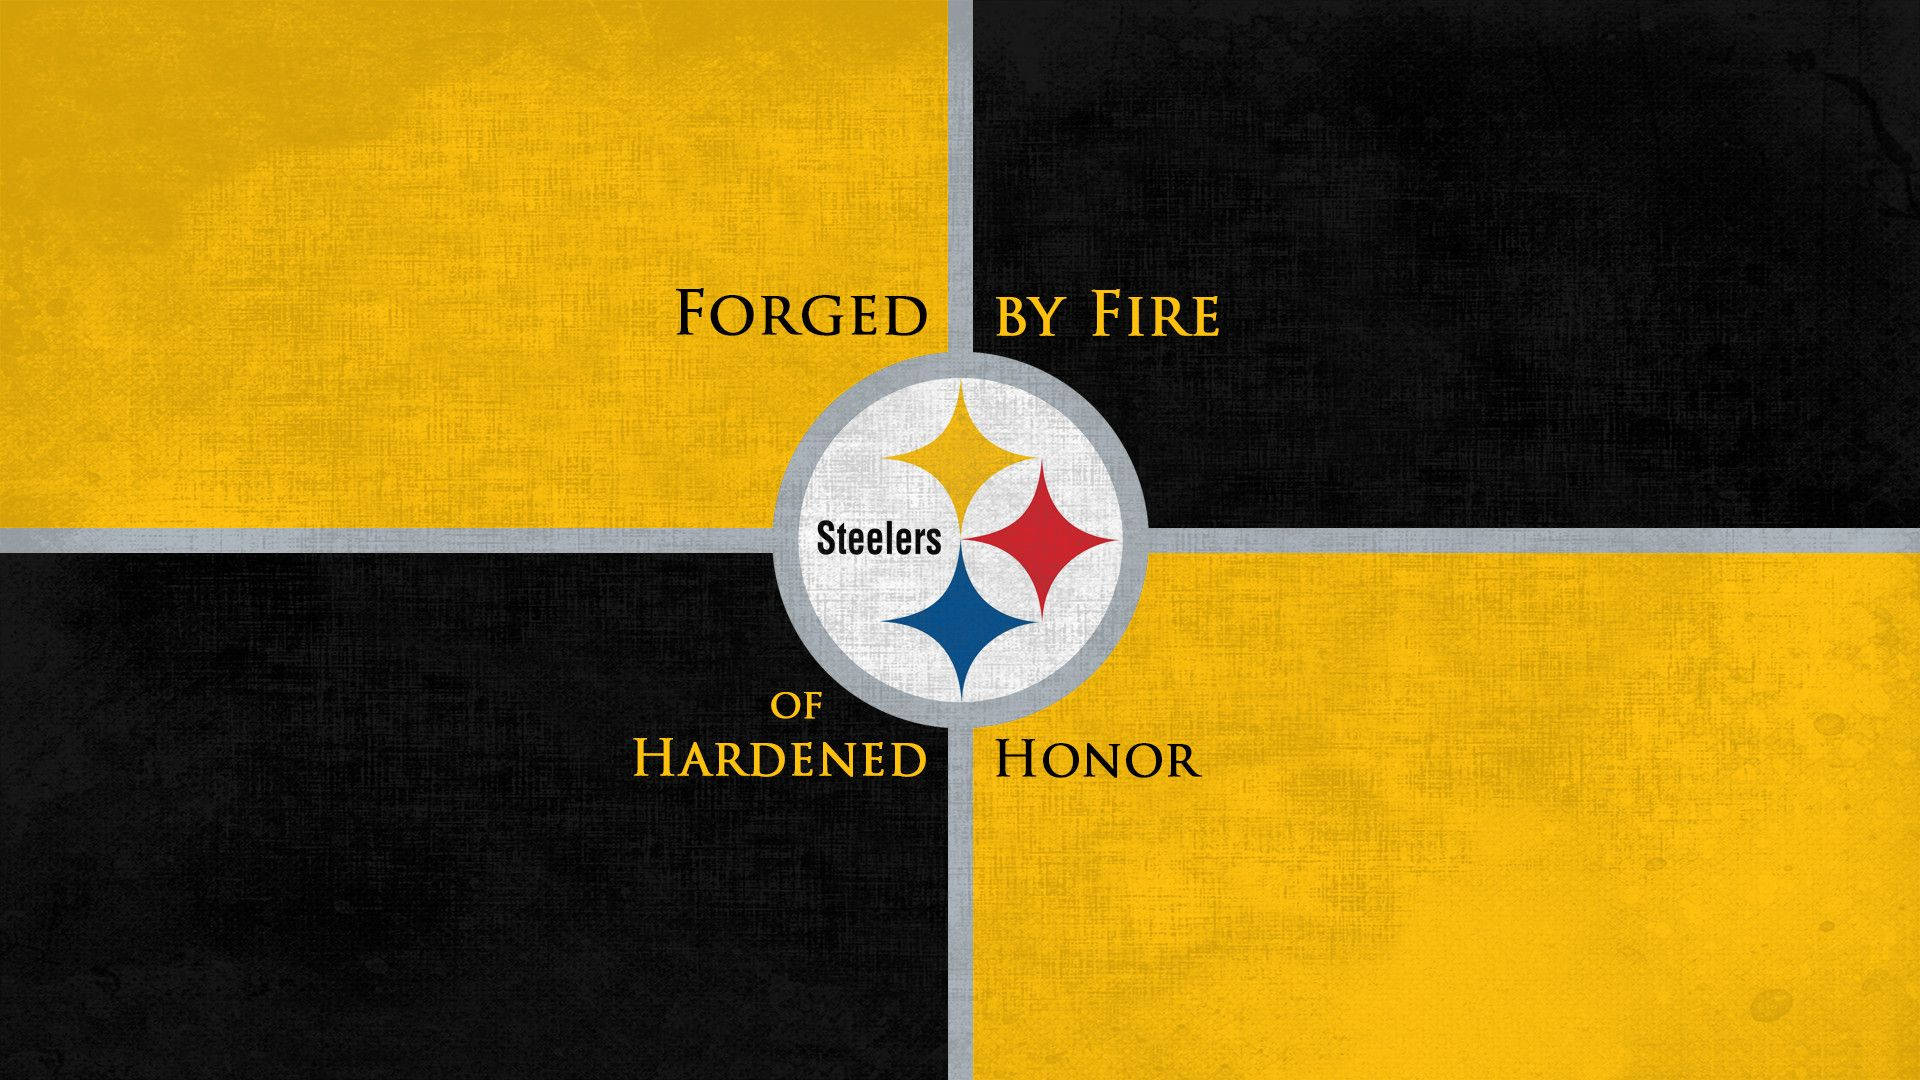 Steelers 1920X1080 Wallpaper and Background Image